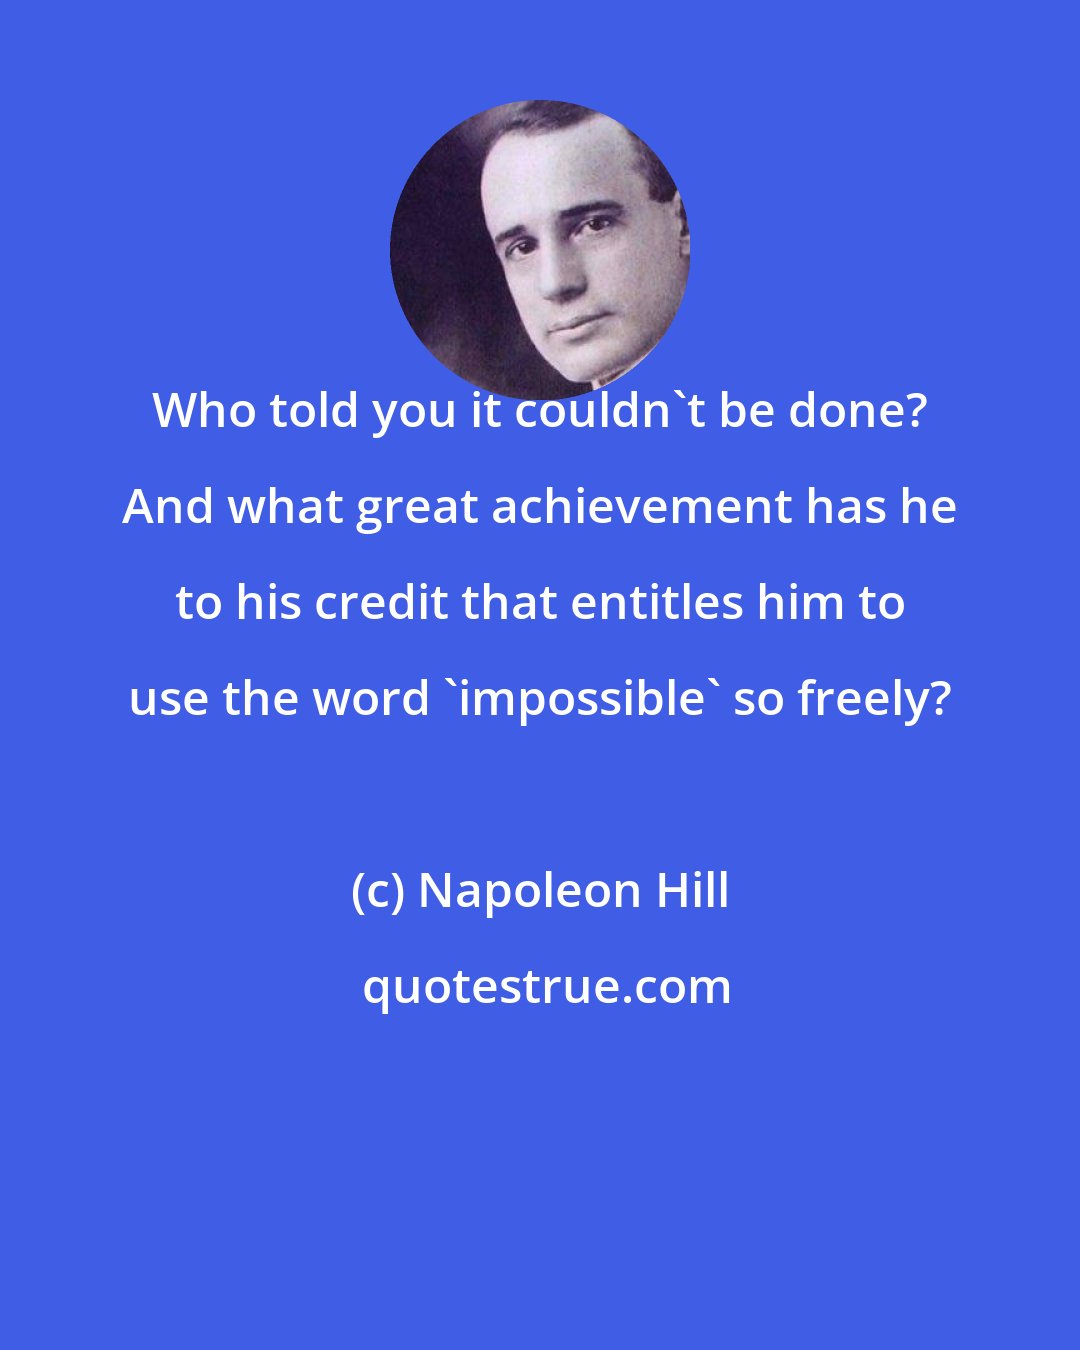 Napoleon Hill: Who told you it couldn't be done? And what great achievement has he to his credit that entitles him to use the word 'impossible' so freely?